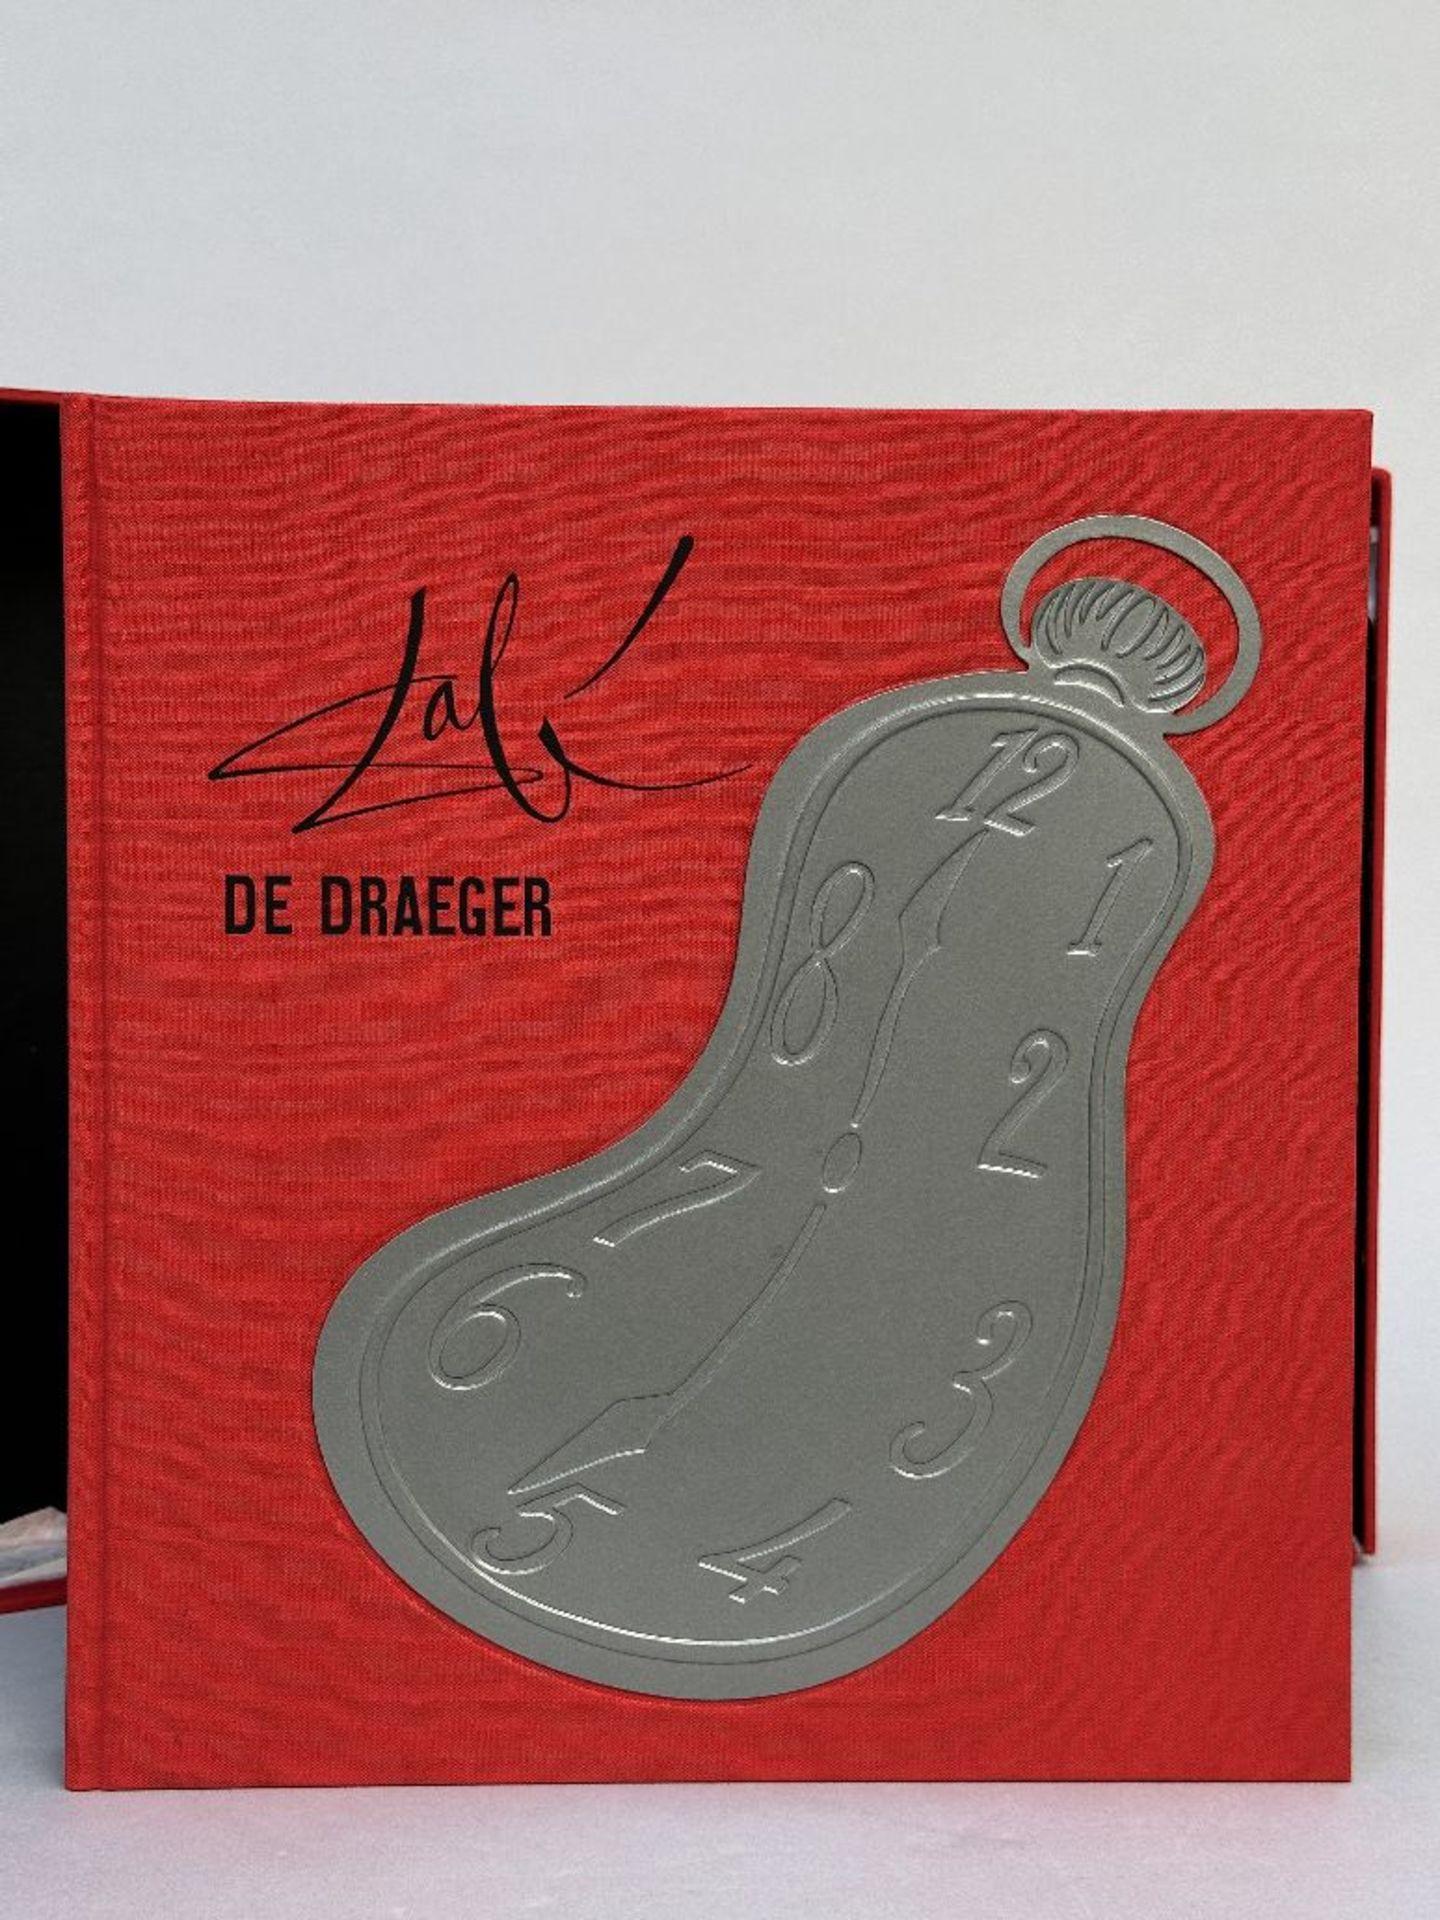 Salvador Dalí: 'The Draeger' book with bronzen medal and posters No. 244 - Image 7 of 9